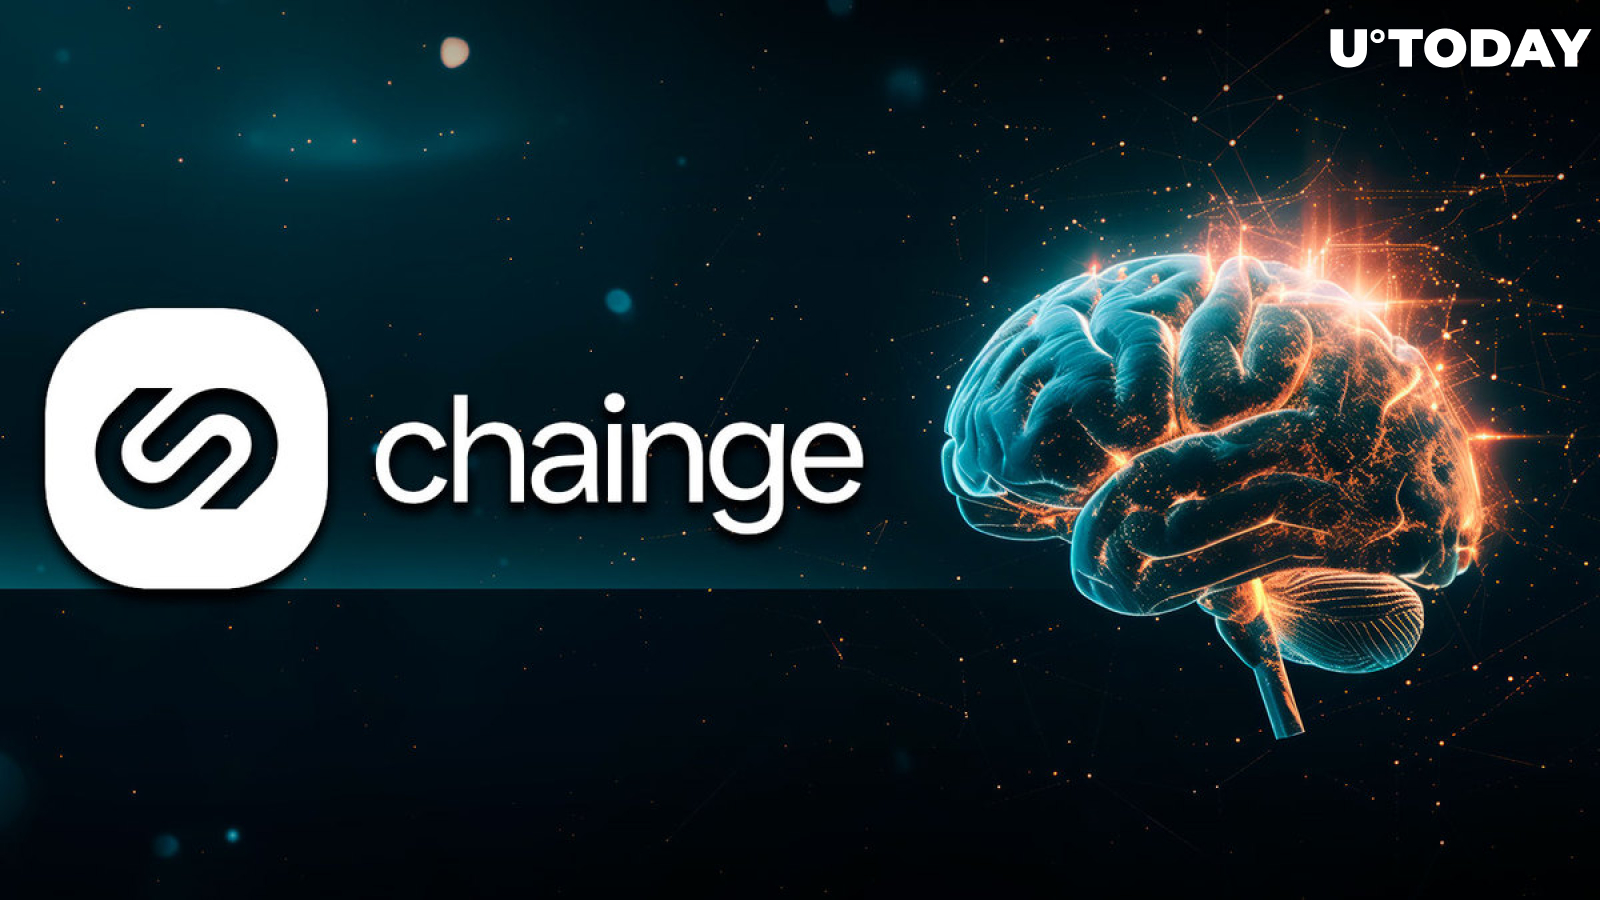 Chainge Completes $13 Million Funding Round, Announces Focus on AI Trading